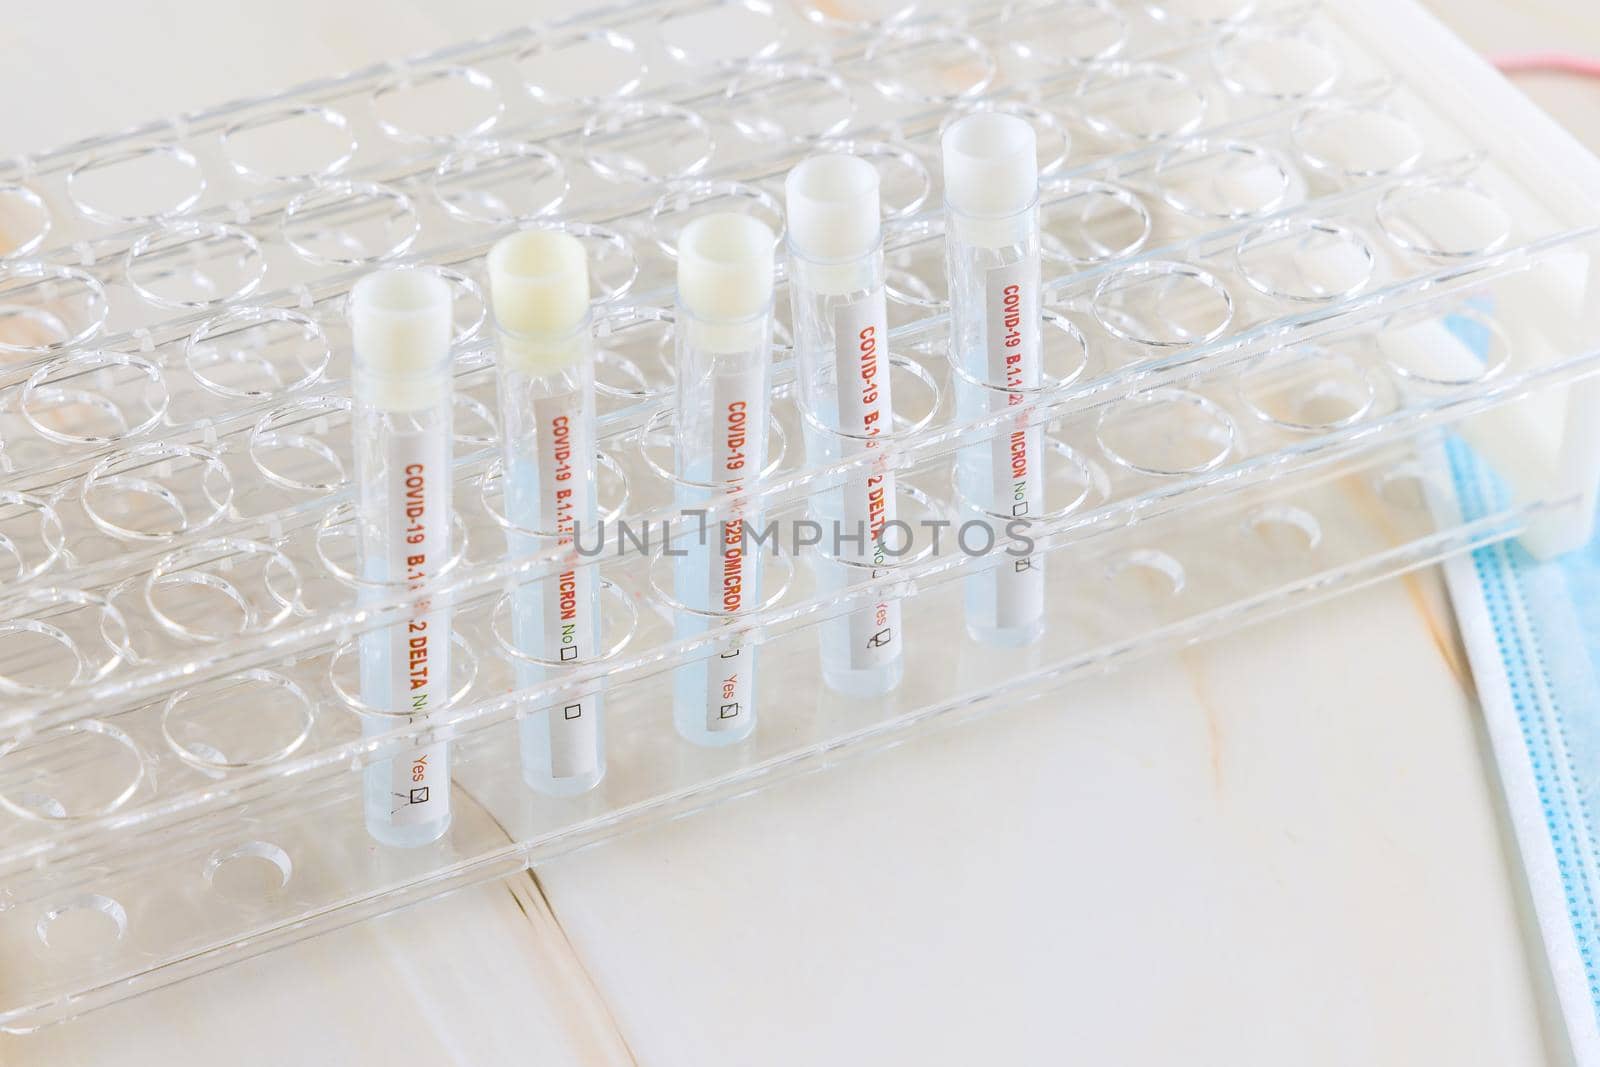 Tube containing a swab sample for COVID-19 that has tested positive of new version Omicron of coronavirus with testing for presence by ungvar